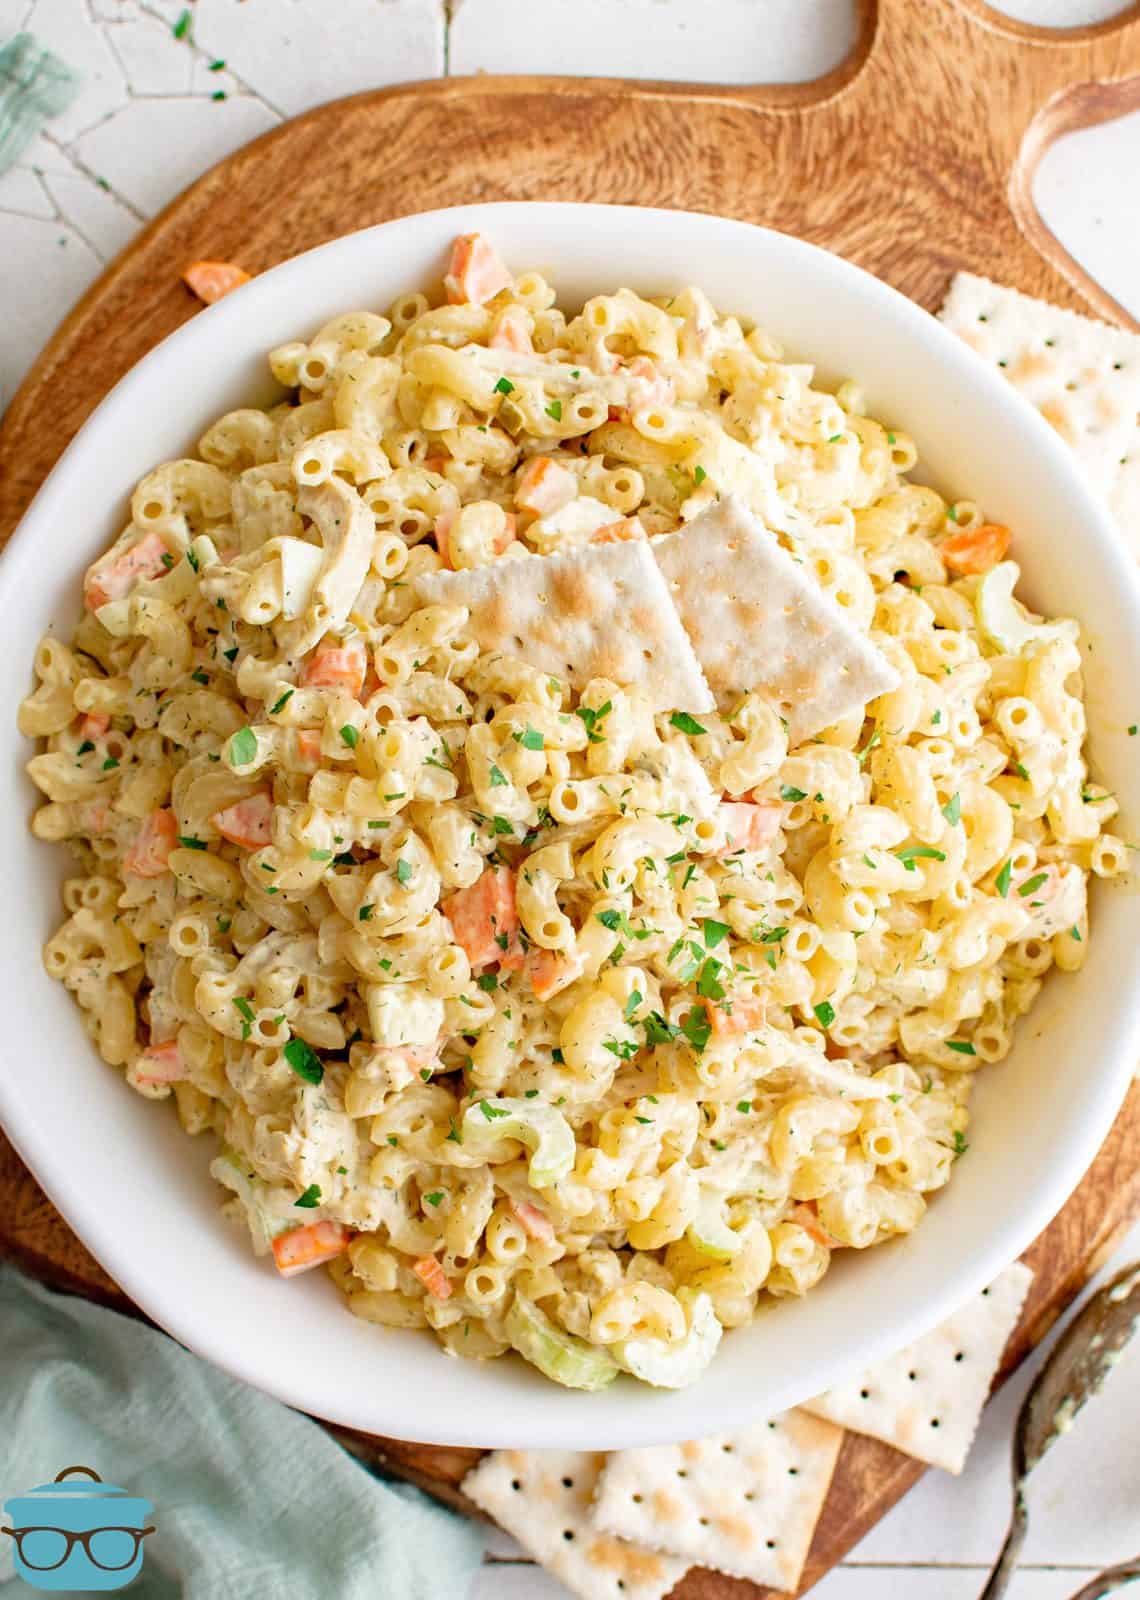 Overhead large bowl of finished Chicken Macaroni Salad.